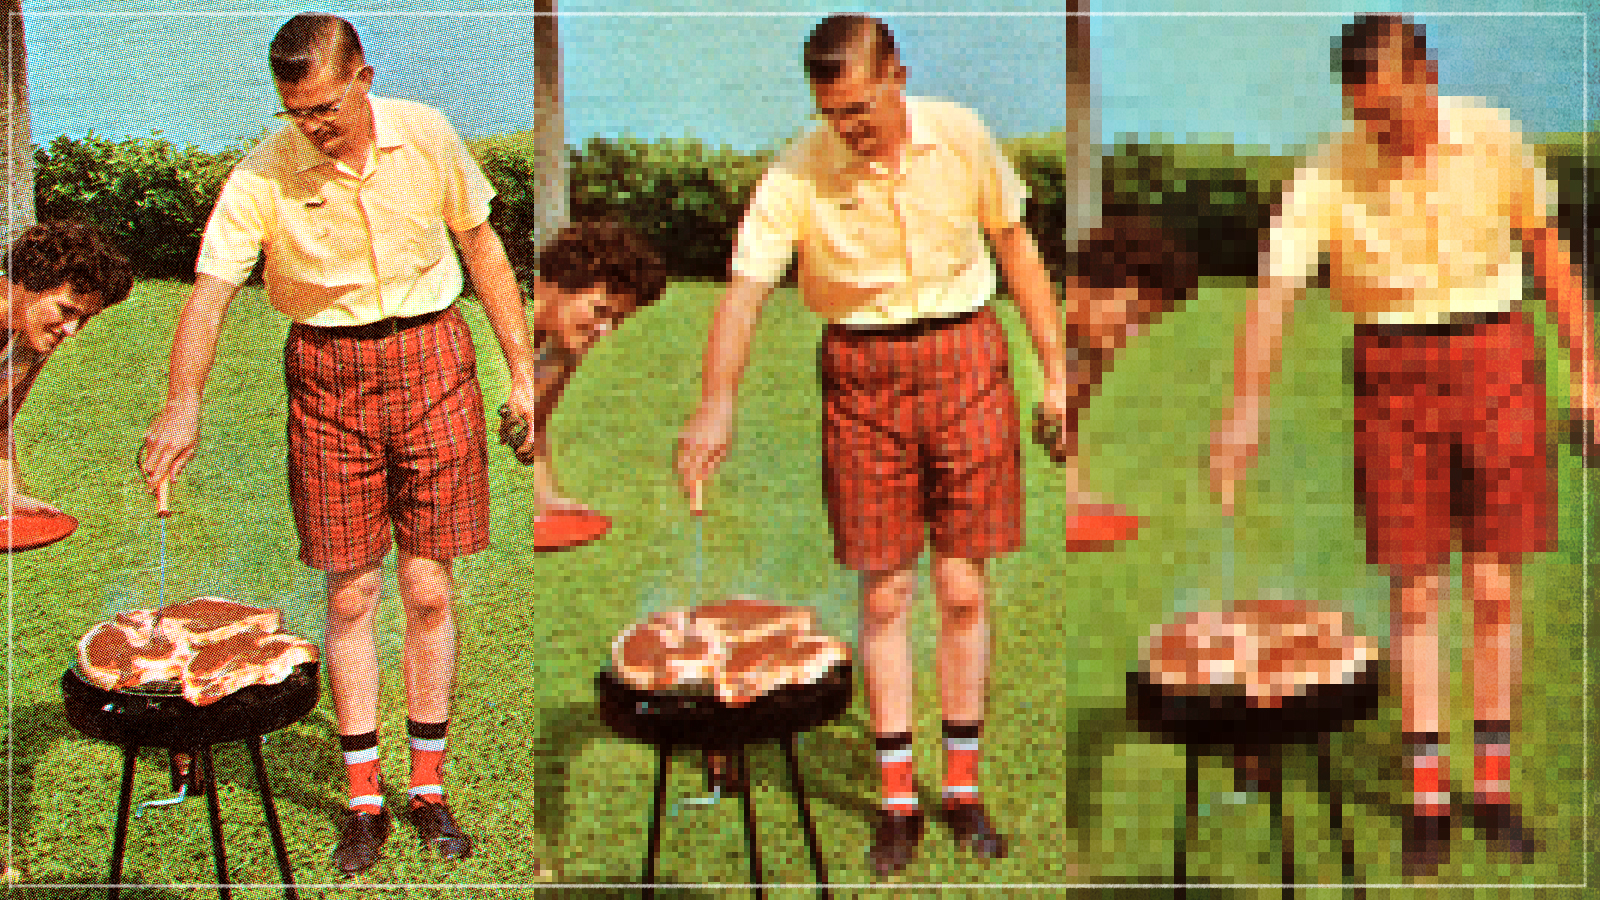 Grilling in the simulation.